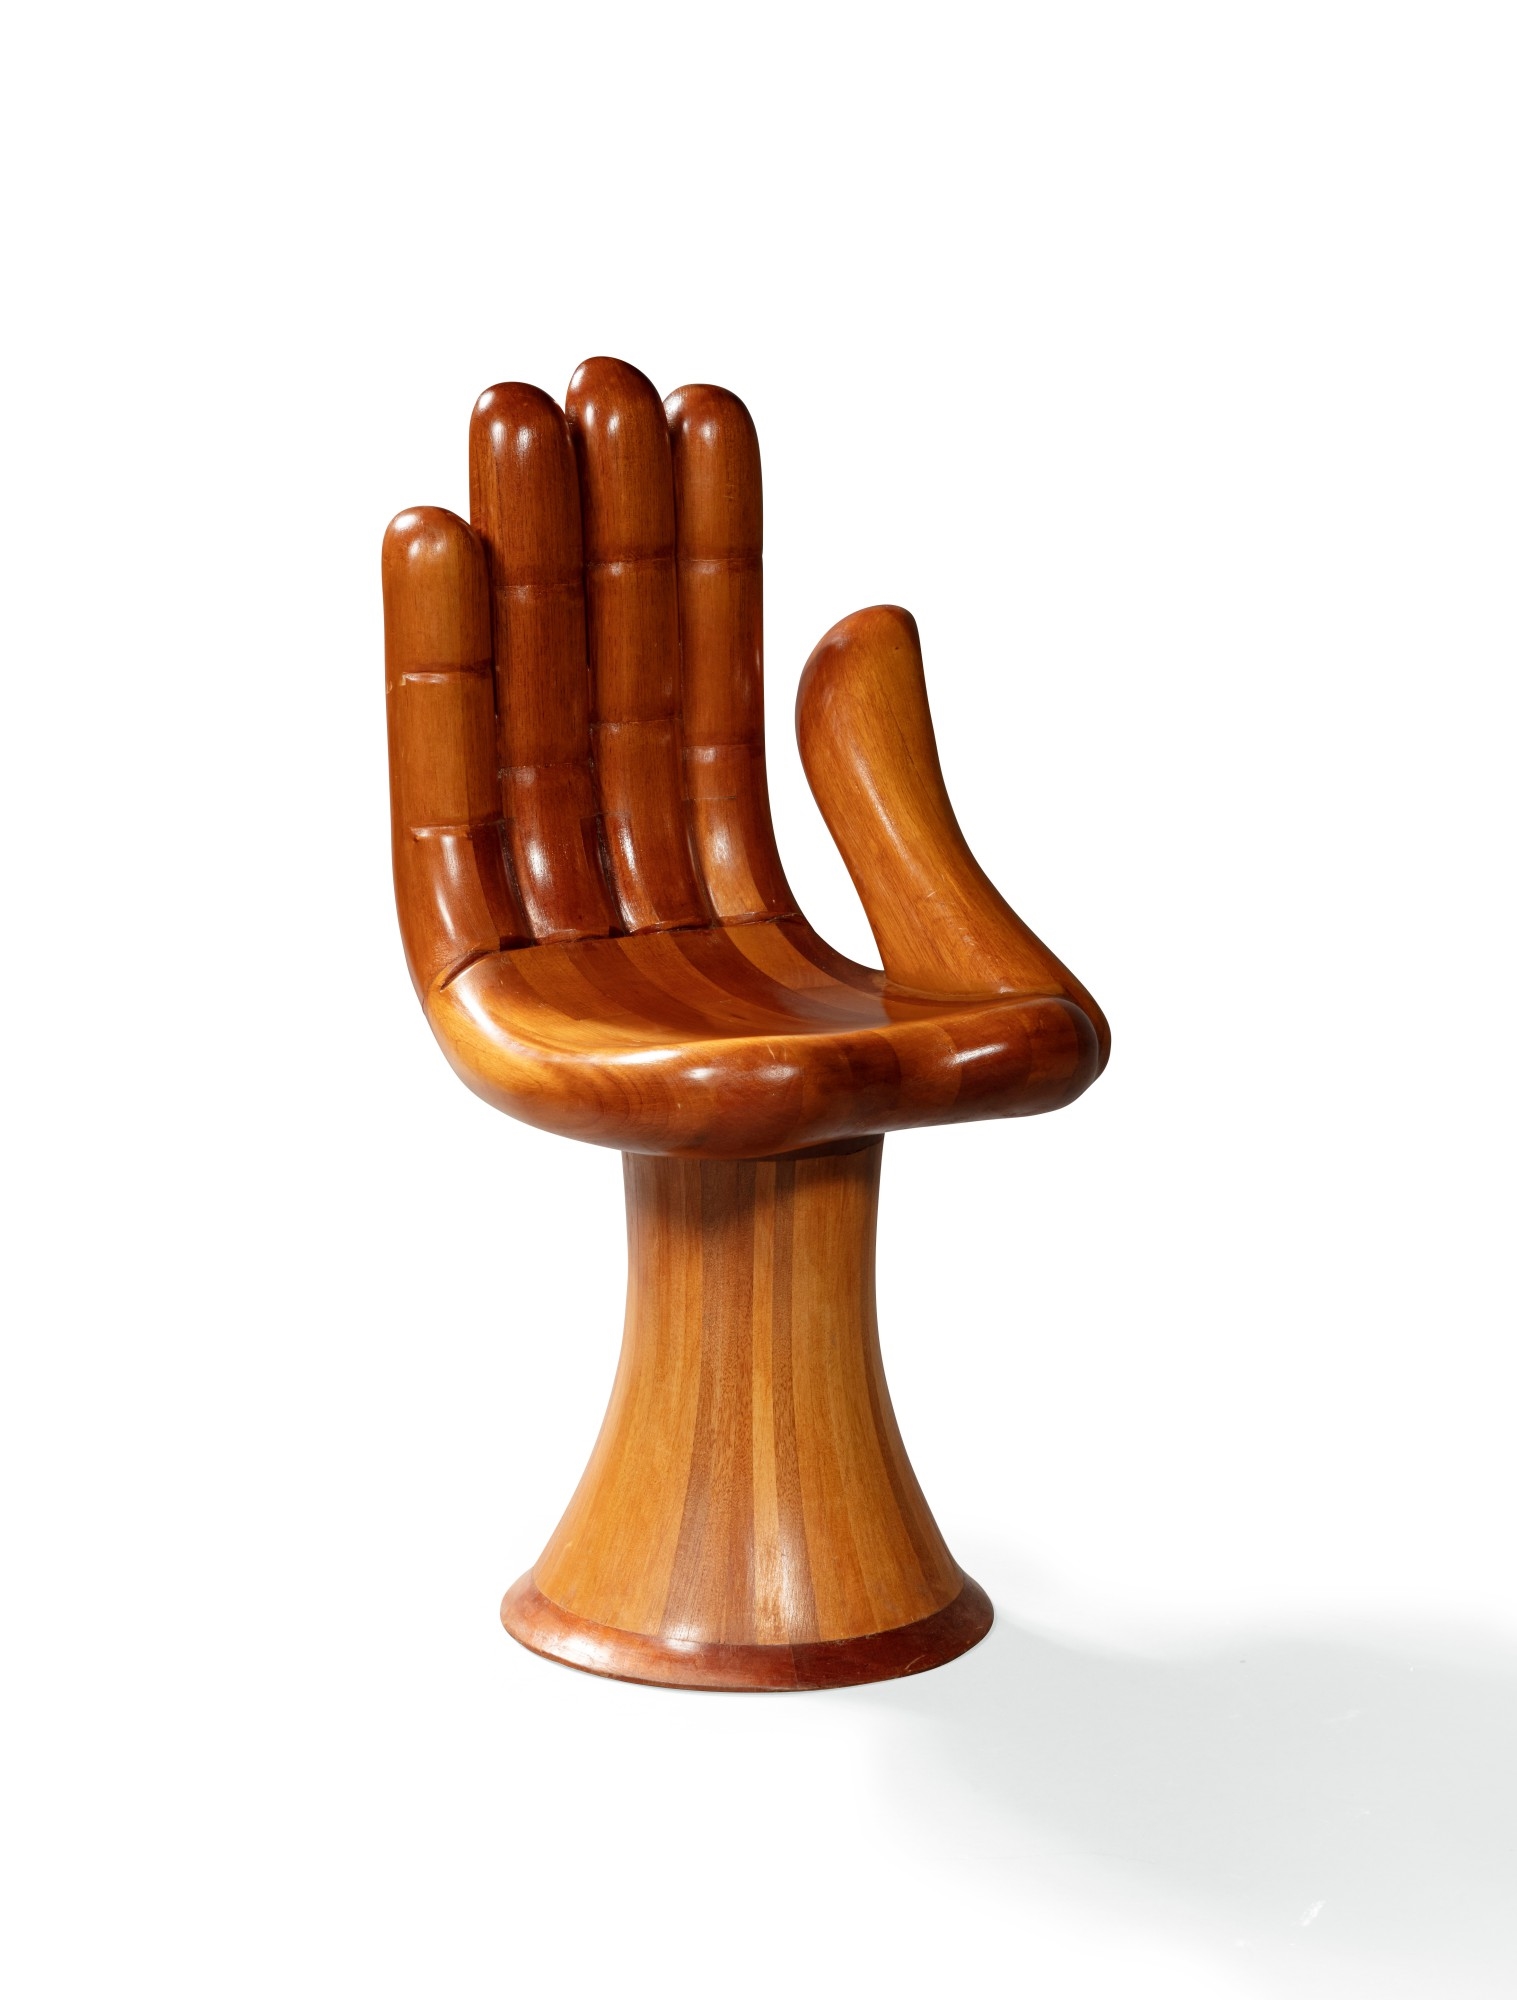 Hand Chair by Pedro Friedeberg, designed circa 1965